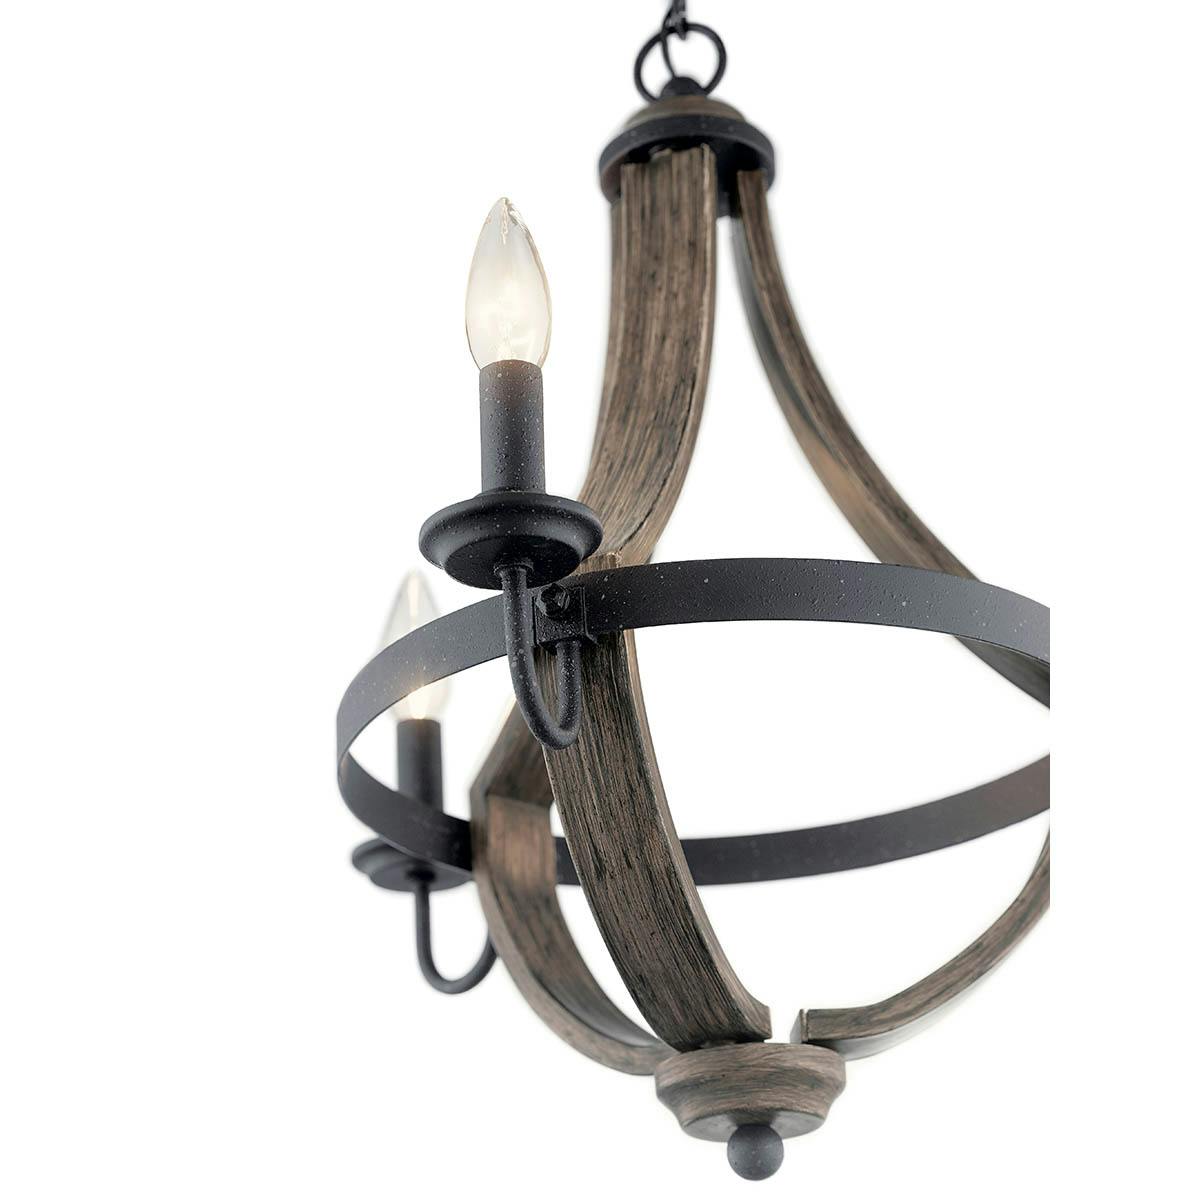 Close up view of the Merlot 18.8" Wine Barrel Chandelier Black on a white background